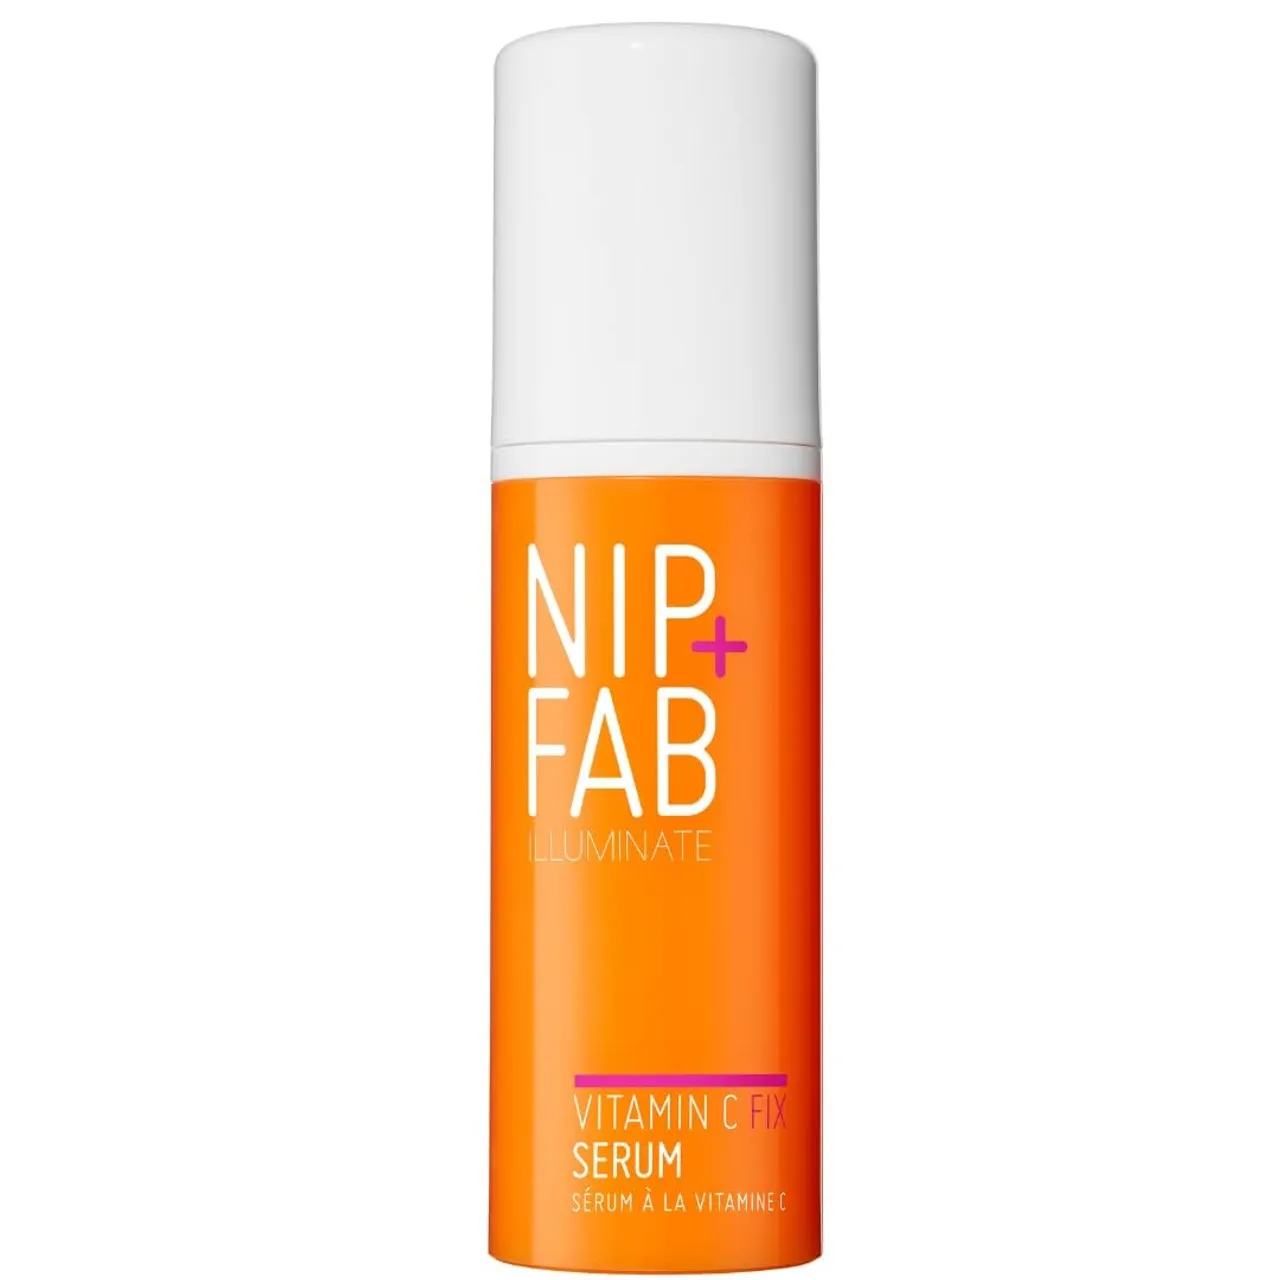 Nip + Fab Vitamin C Fix Serum for Face with Carrot Oil and